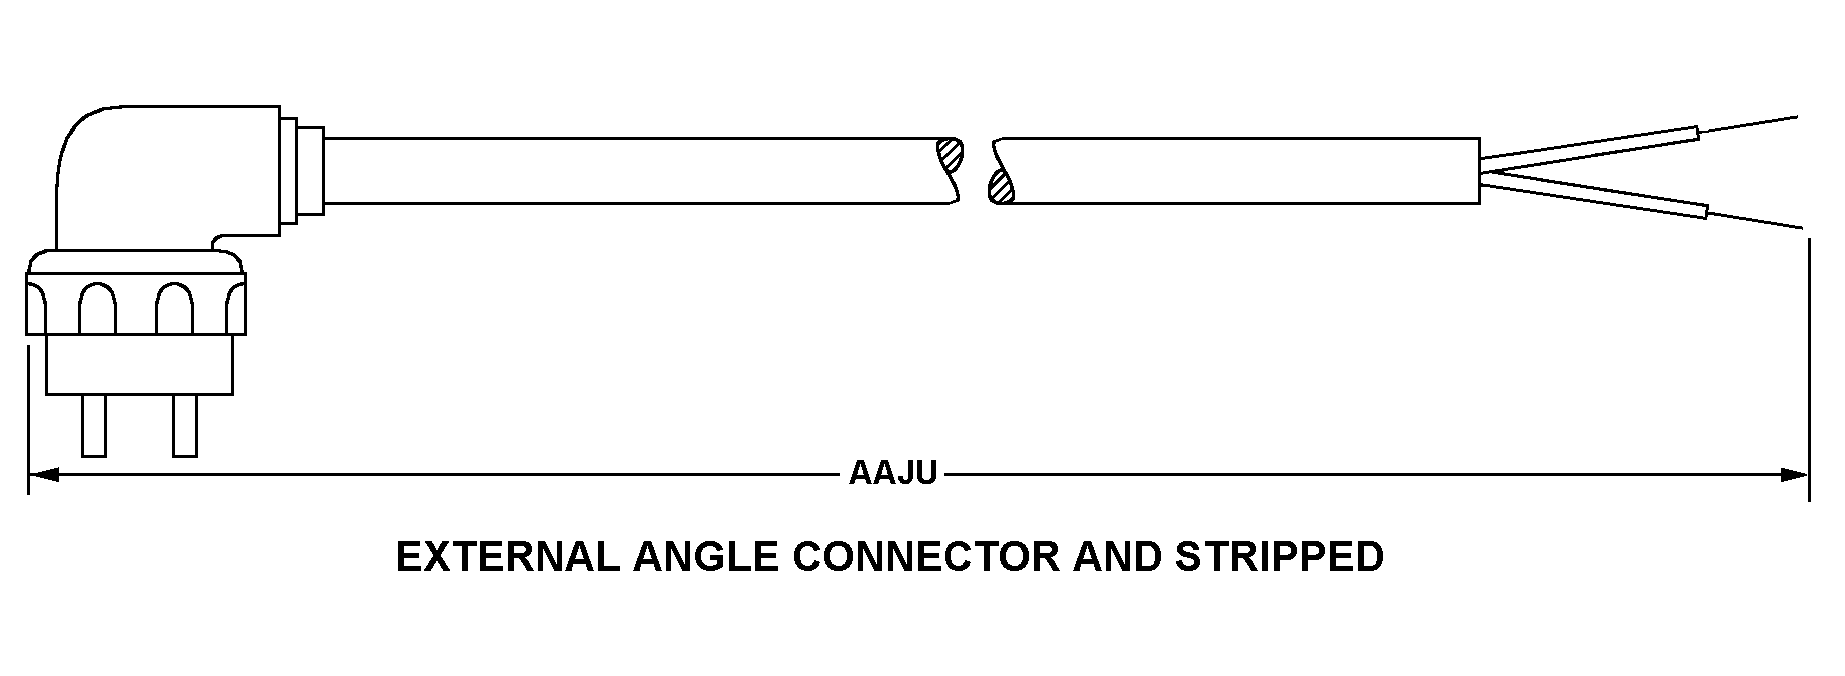 EXTERNAL ANGLE CONNECTOR AND STRIPPED style nsn 6150-01-238-3299